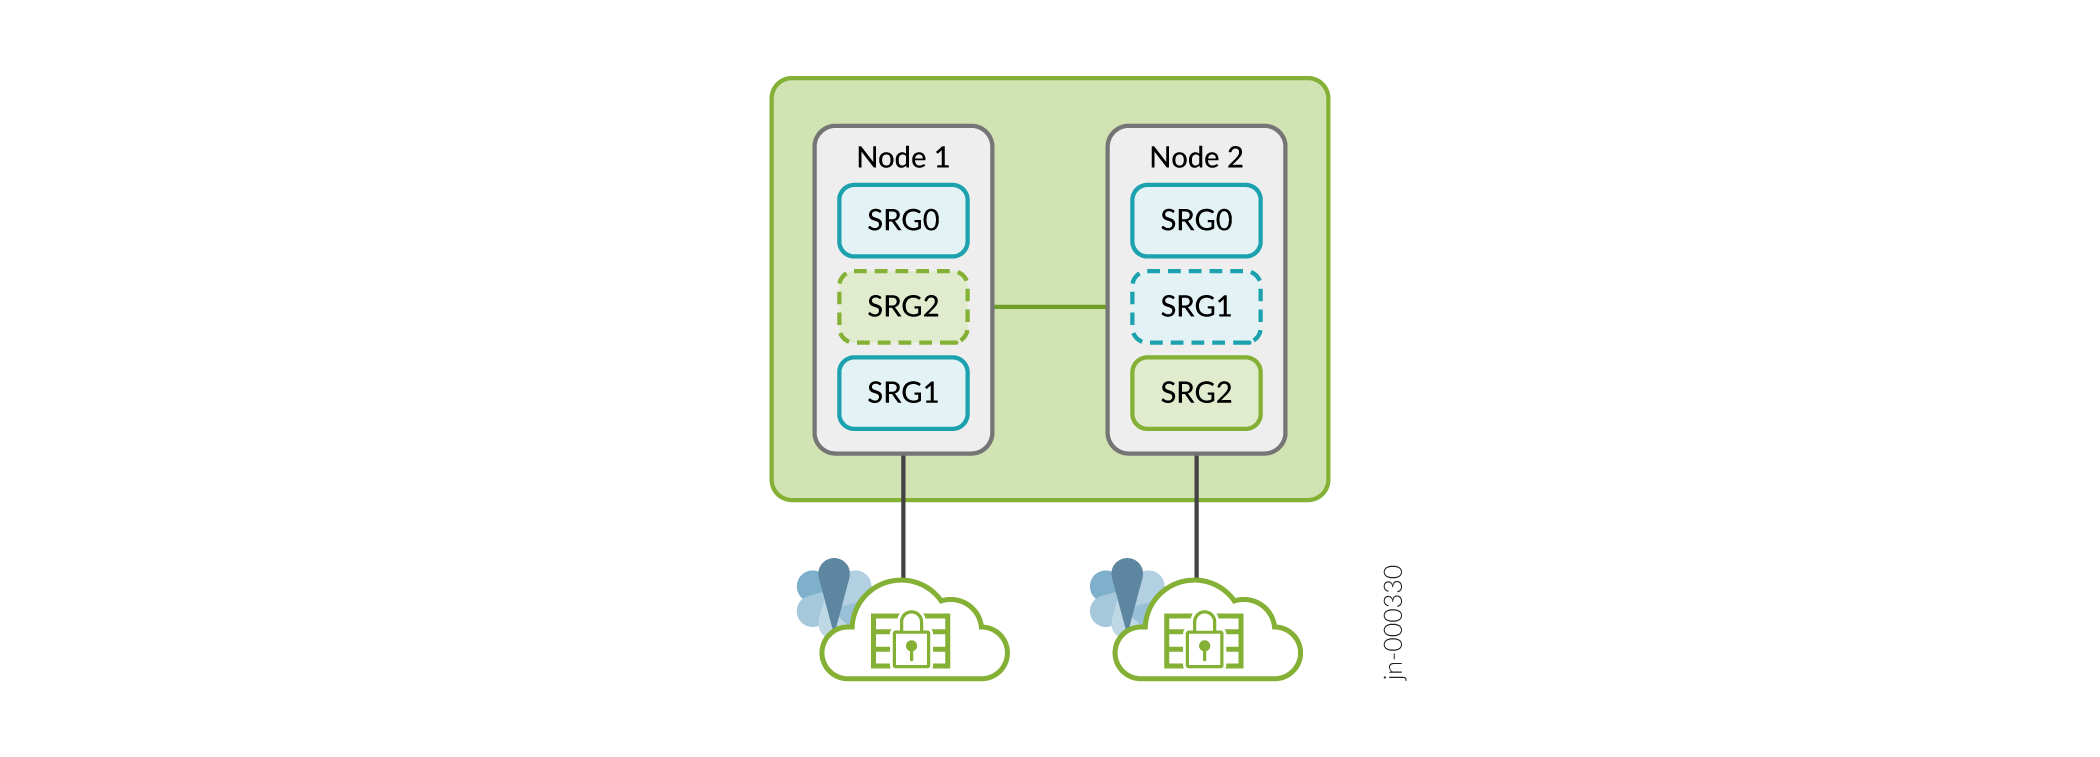 Multi SRG Support in Multinode High Availability (Active-Active Mode)